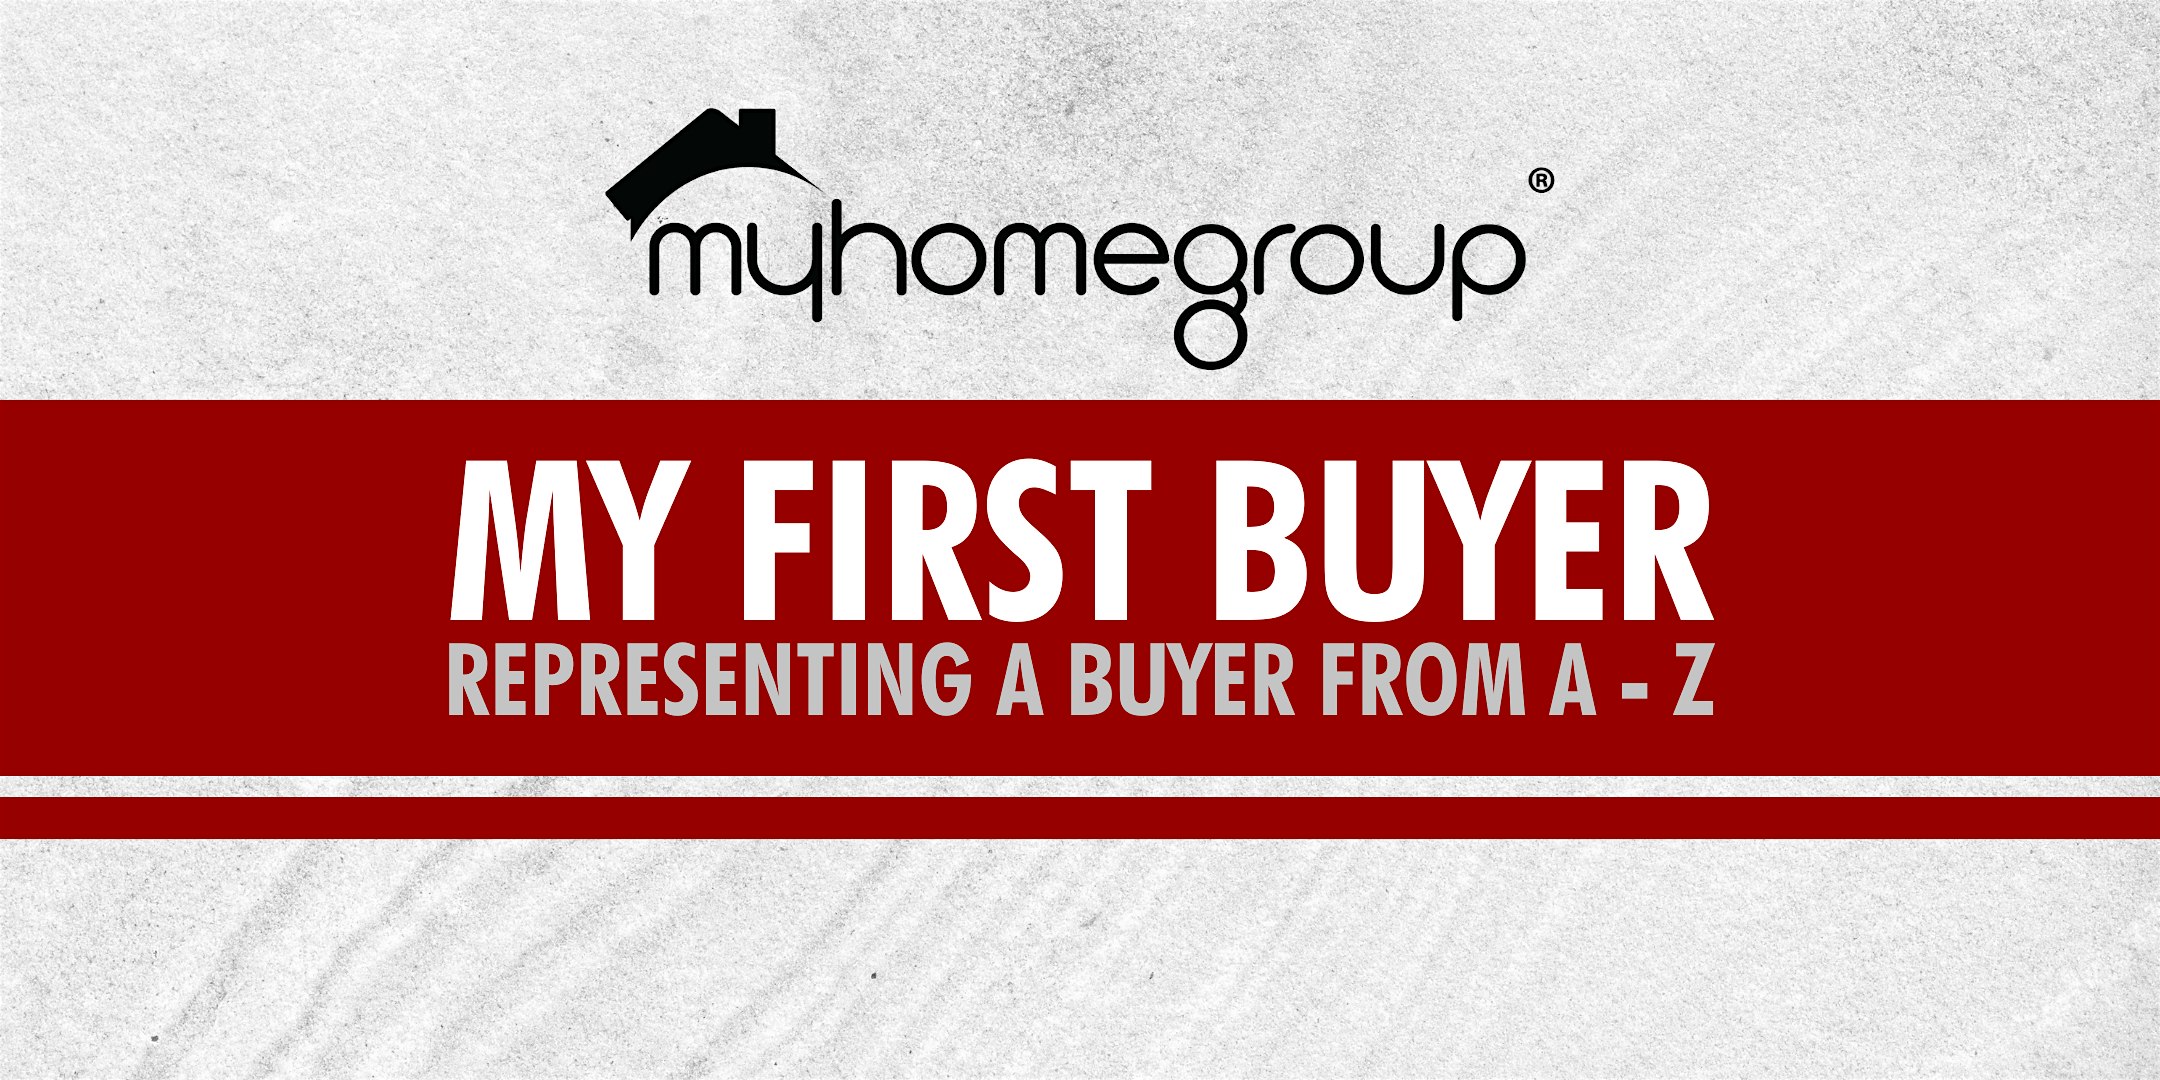 My First Buyer... Representing a Buyer from A to Z